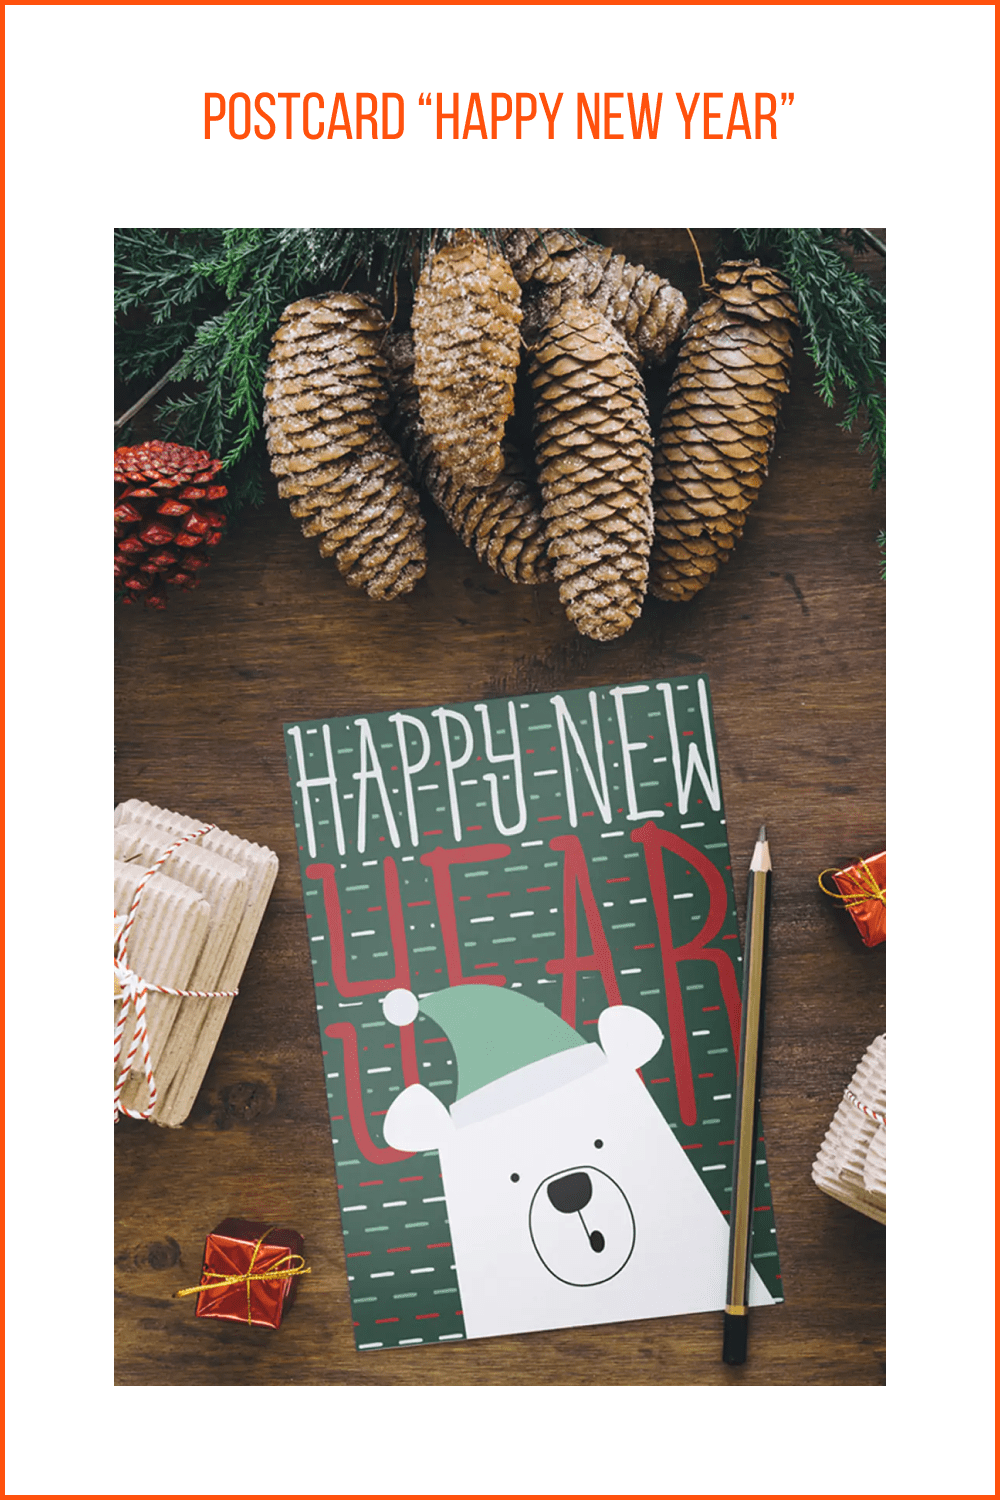 Greeting card on the background of fir cones with white bear.